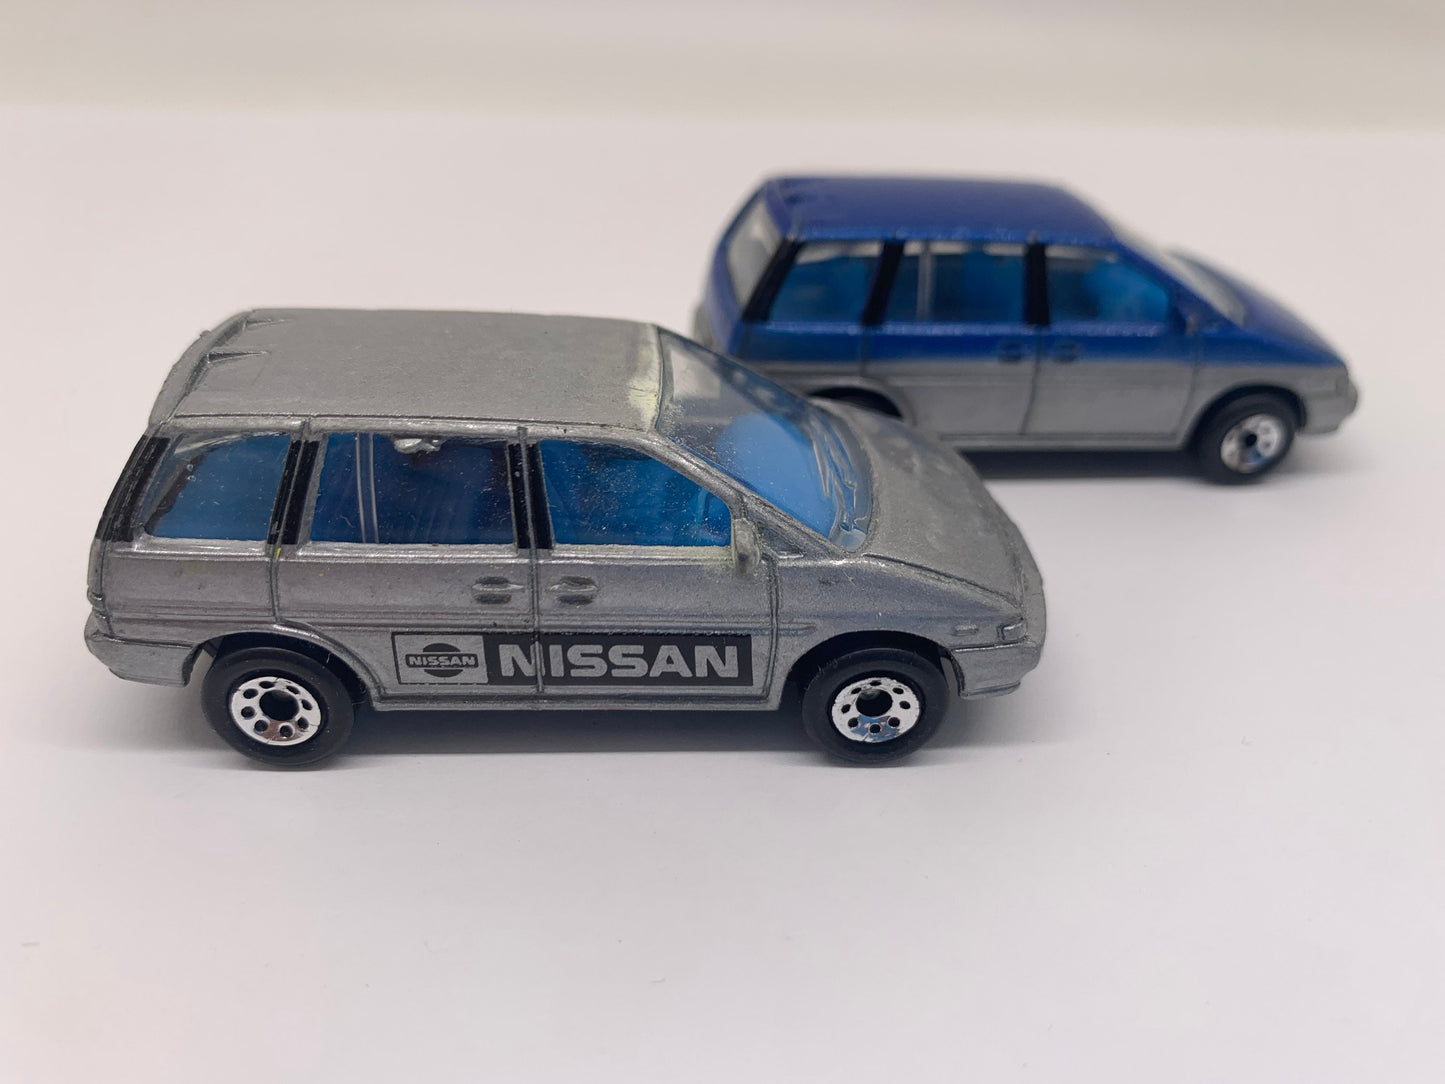 Matchbox 1991 Nissan Prairie Metalflake Blue Silver 1-75 Collectable Miniature Scale Model Toy Car Perfect Birthday Gift